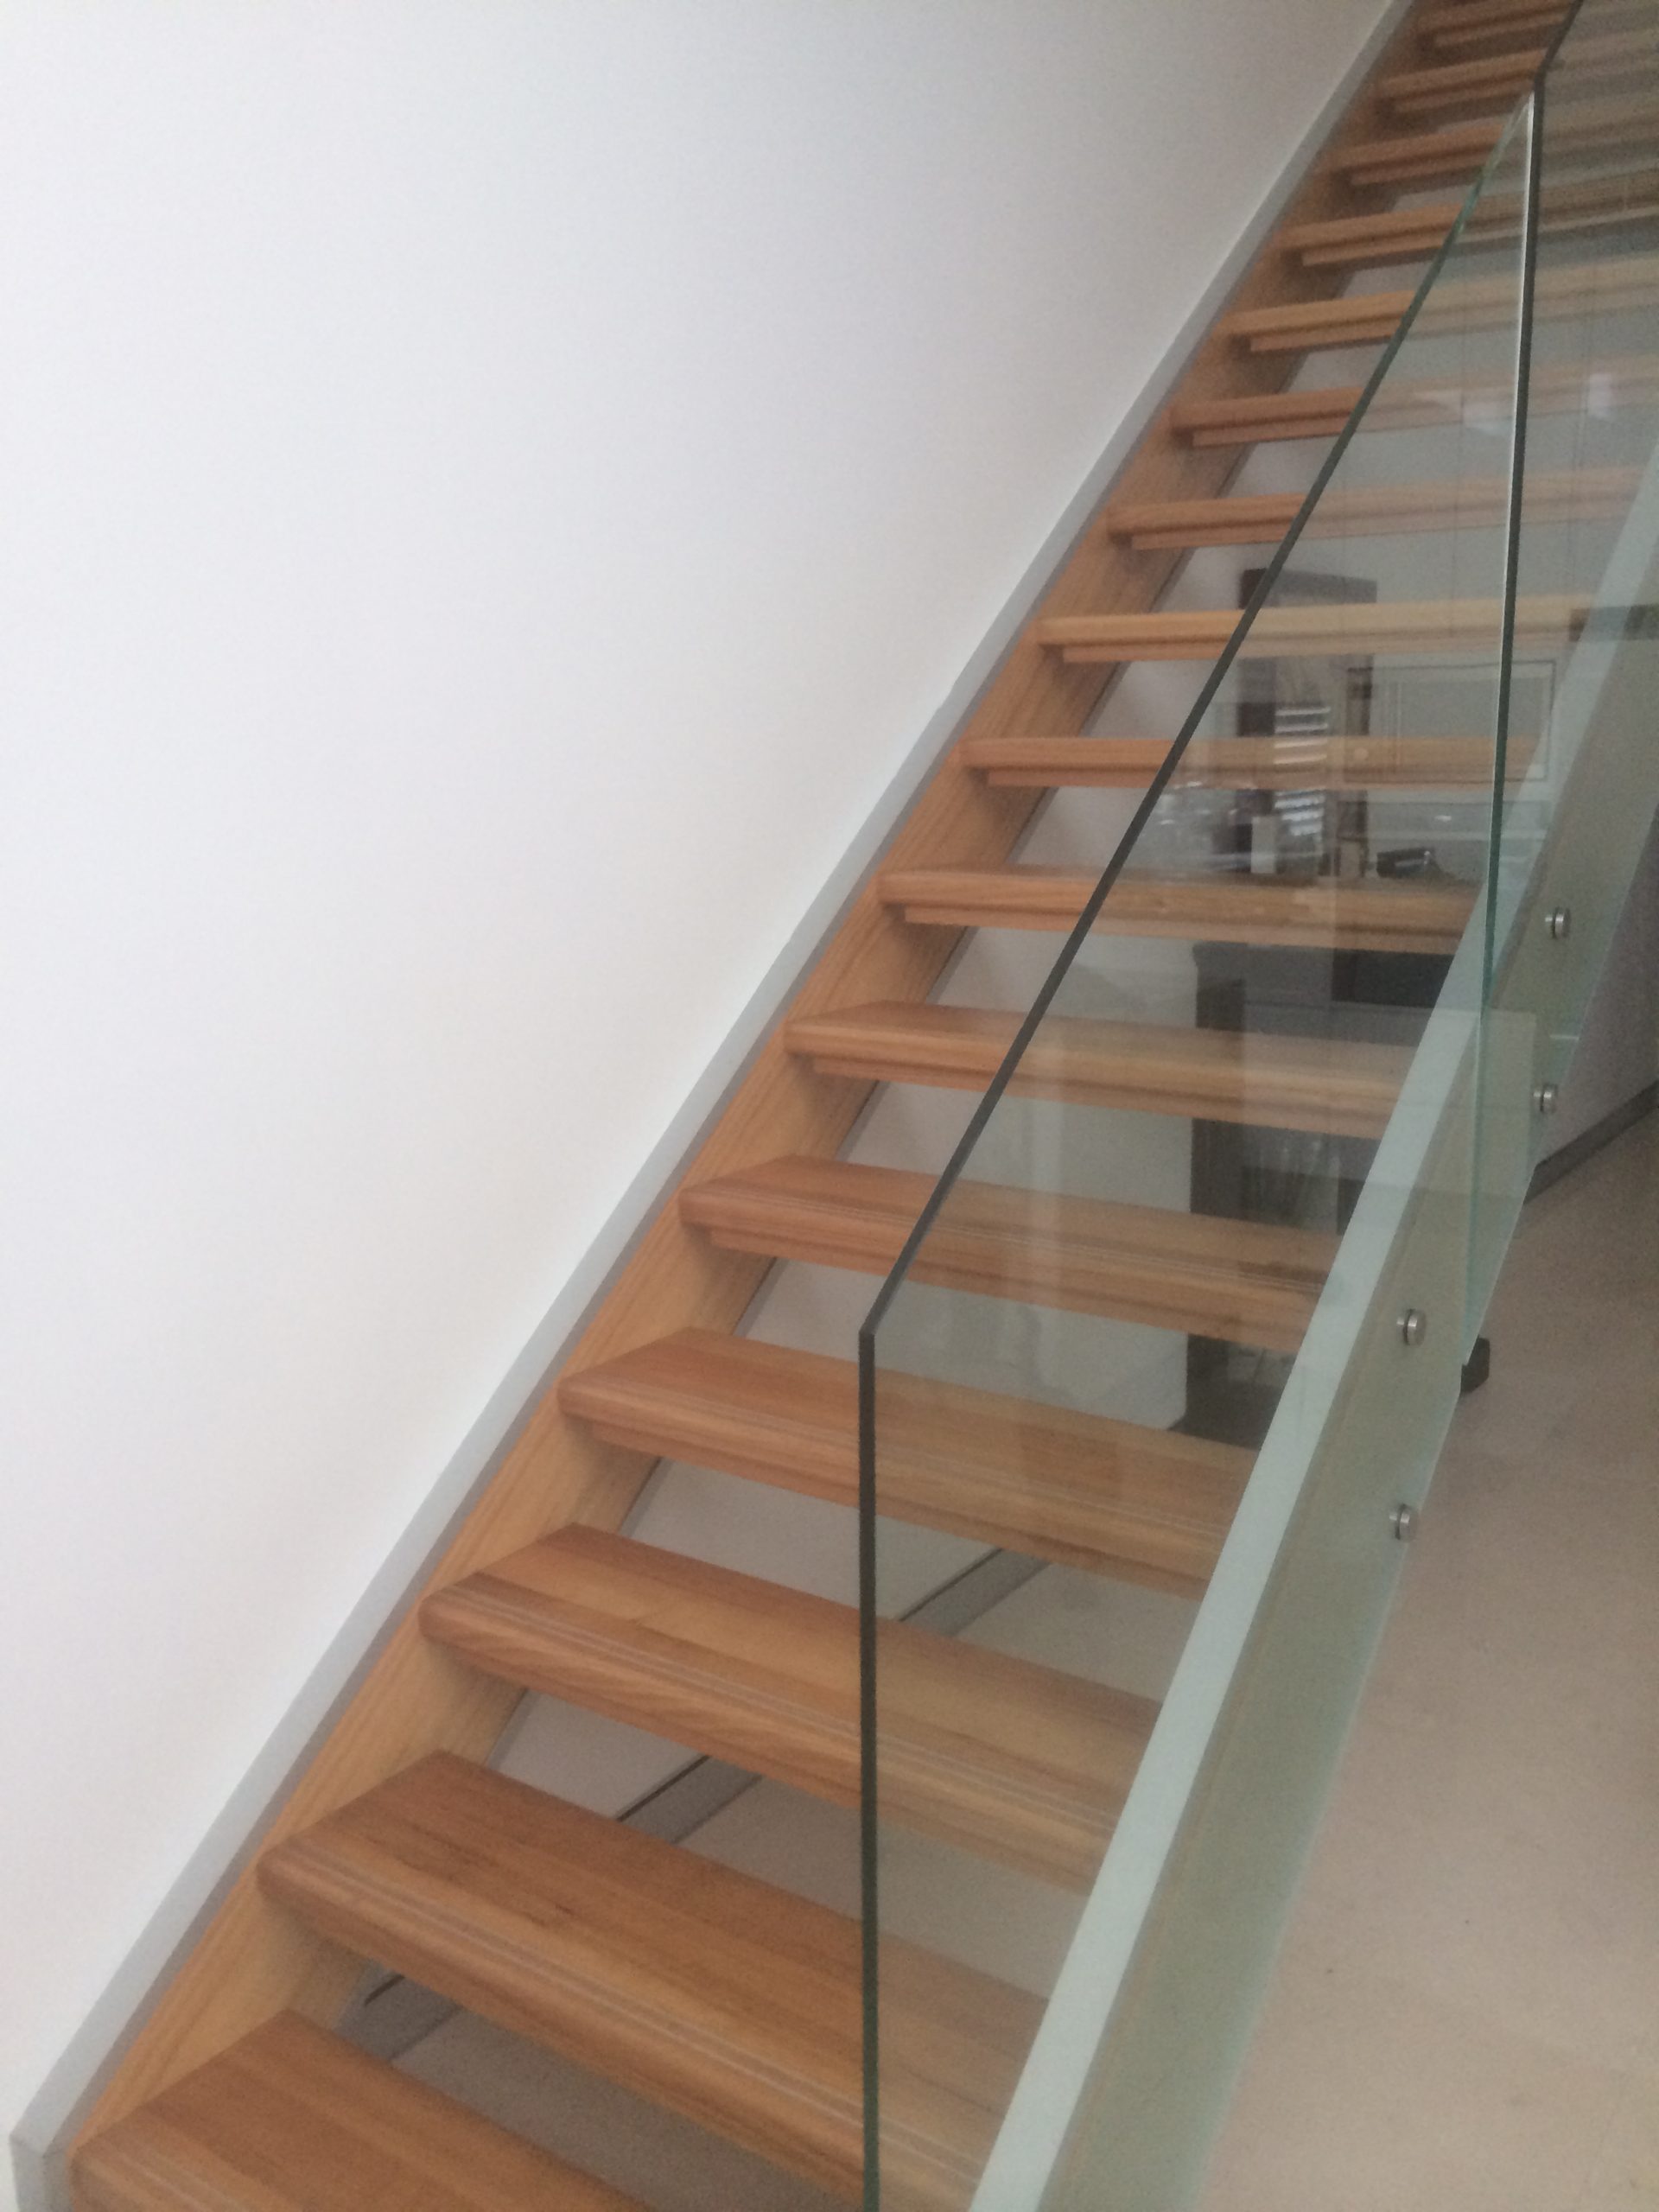 Glass Balustrade Staircase | The Stair Factory